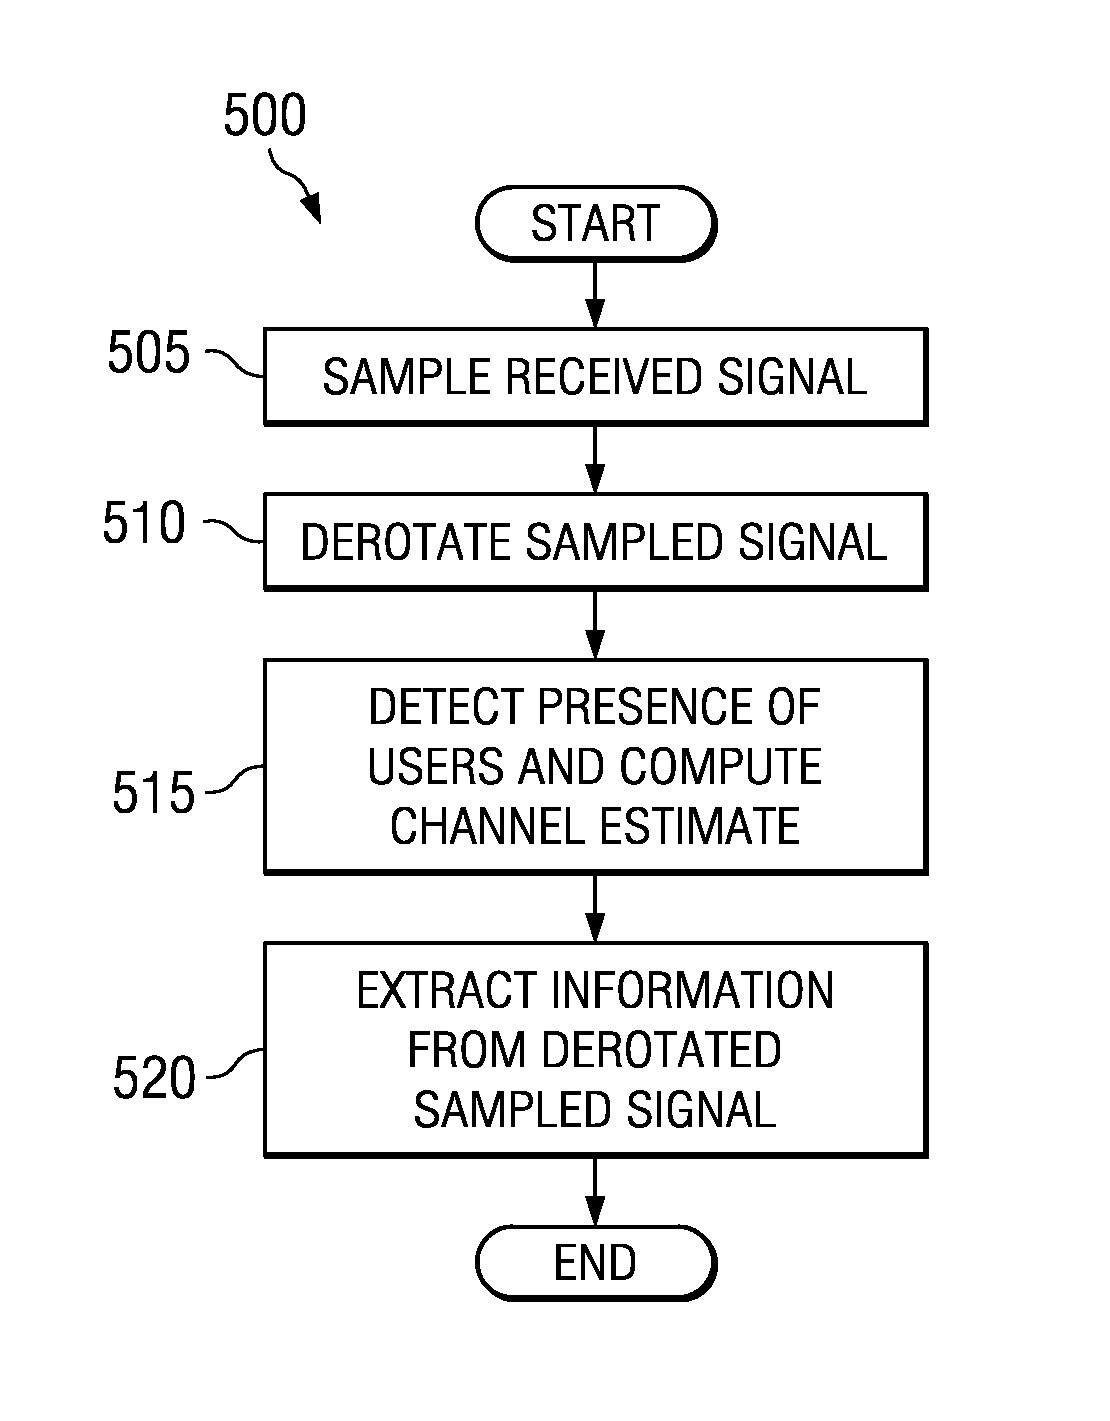 Multiuser detection for wireless communications systems in the presence of interference